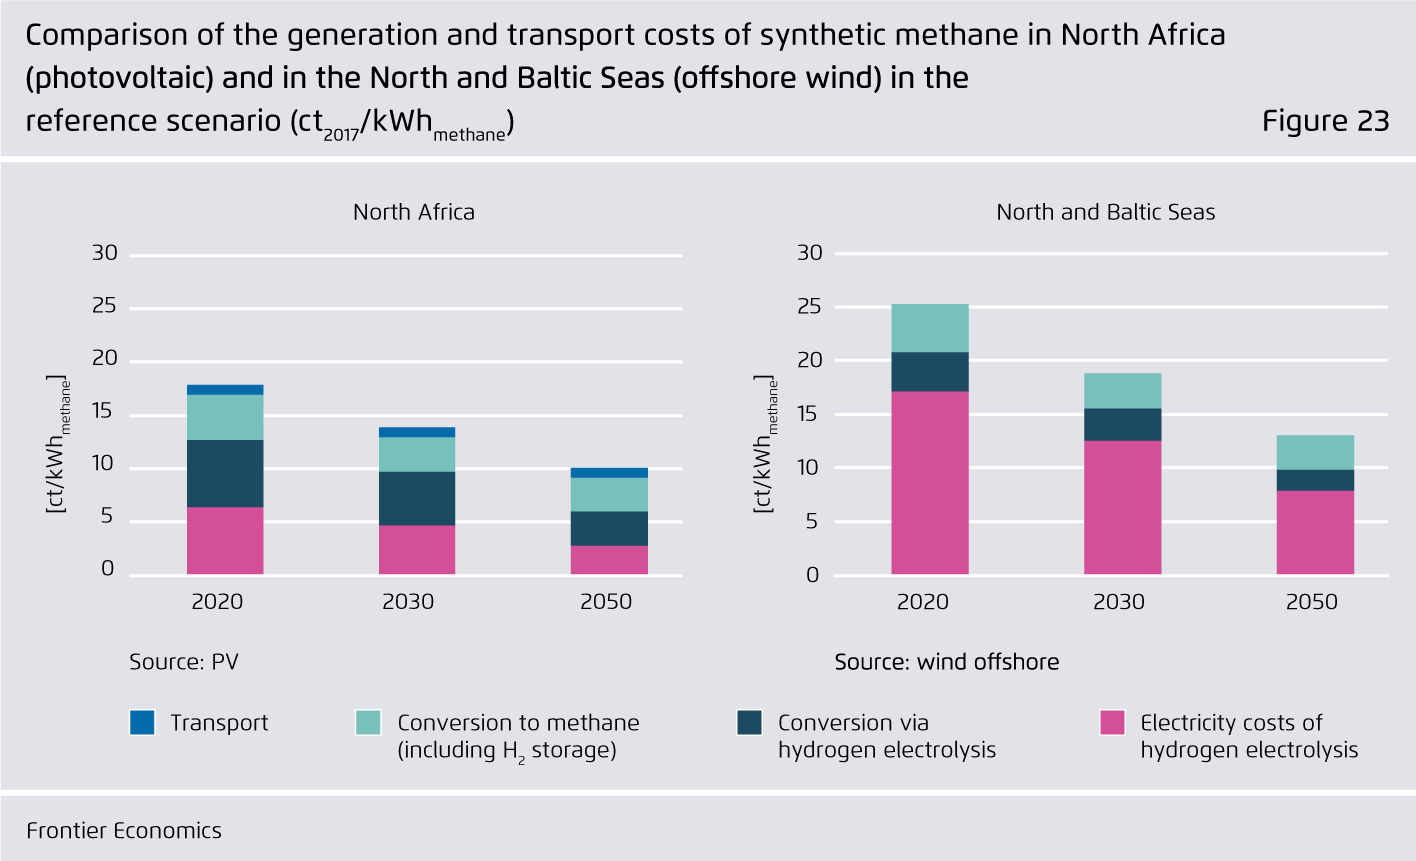 Preview for Comparison of the generation and transport costs of synthetic methane in North Africa (photovoltaic) and in the North and Baltic Seas (offshore wind) in the reference scenario (ct2017/kWhmethane)